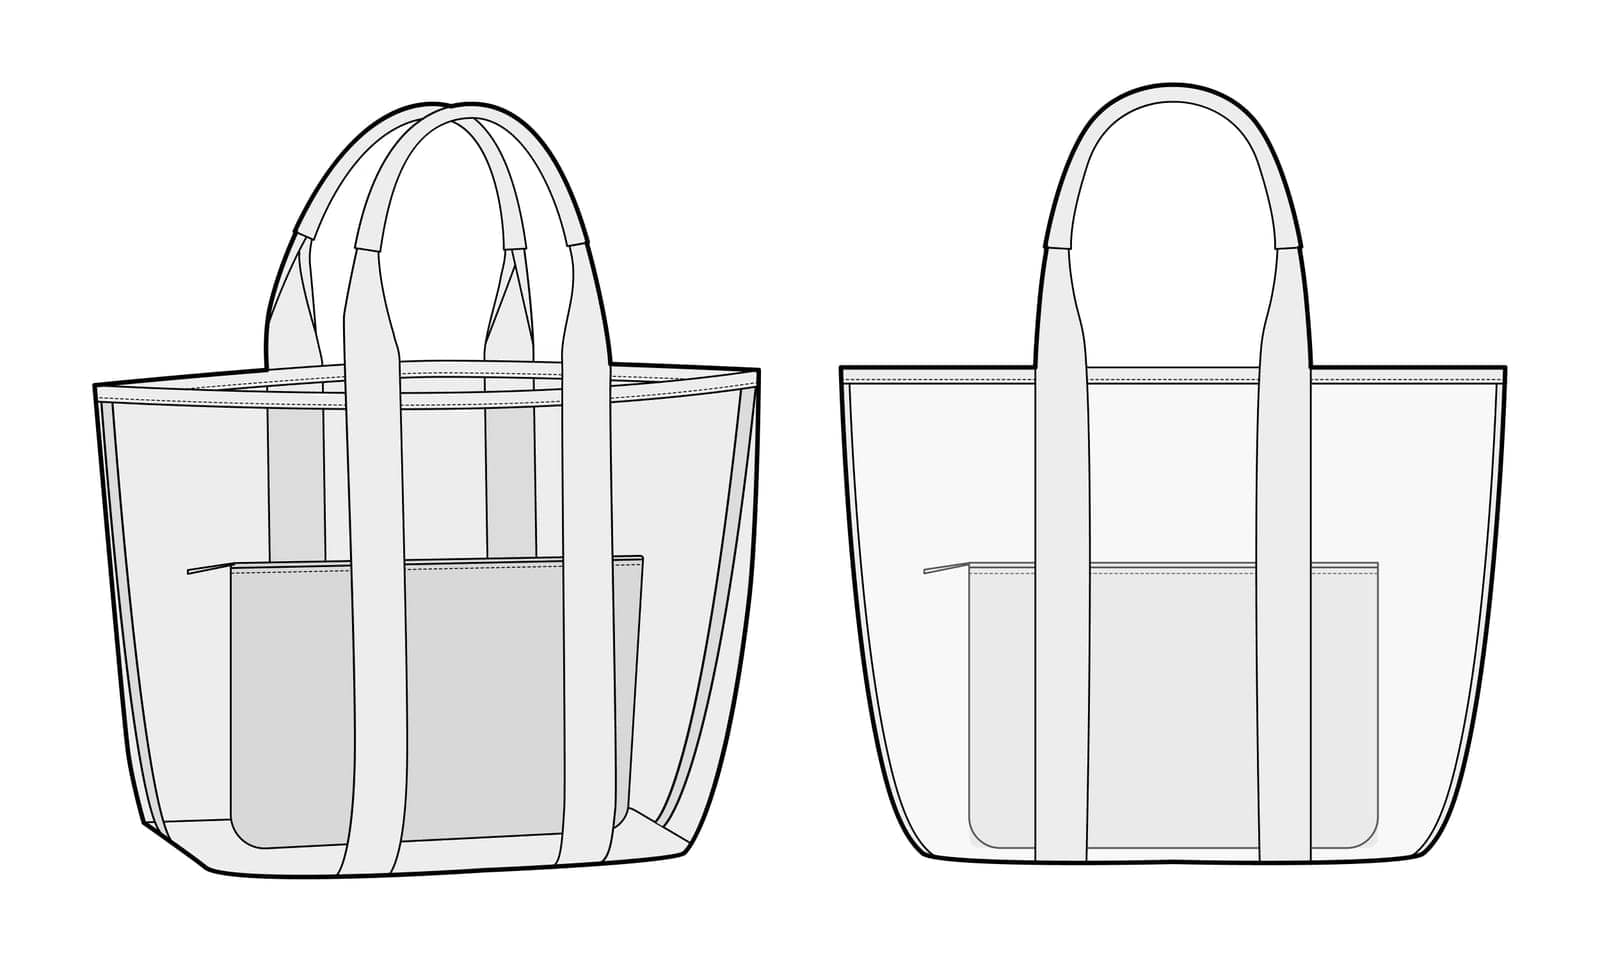 Beach Transparent Pool Tote with inner removable pouch bag. Fashion accessory technical illustration. Vector satchel by Vectoressa